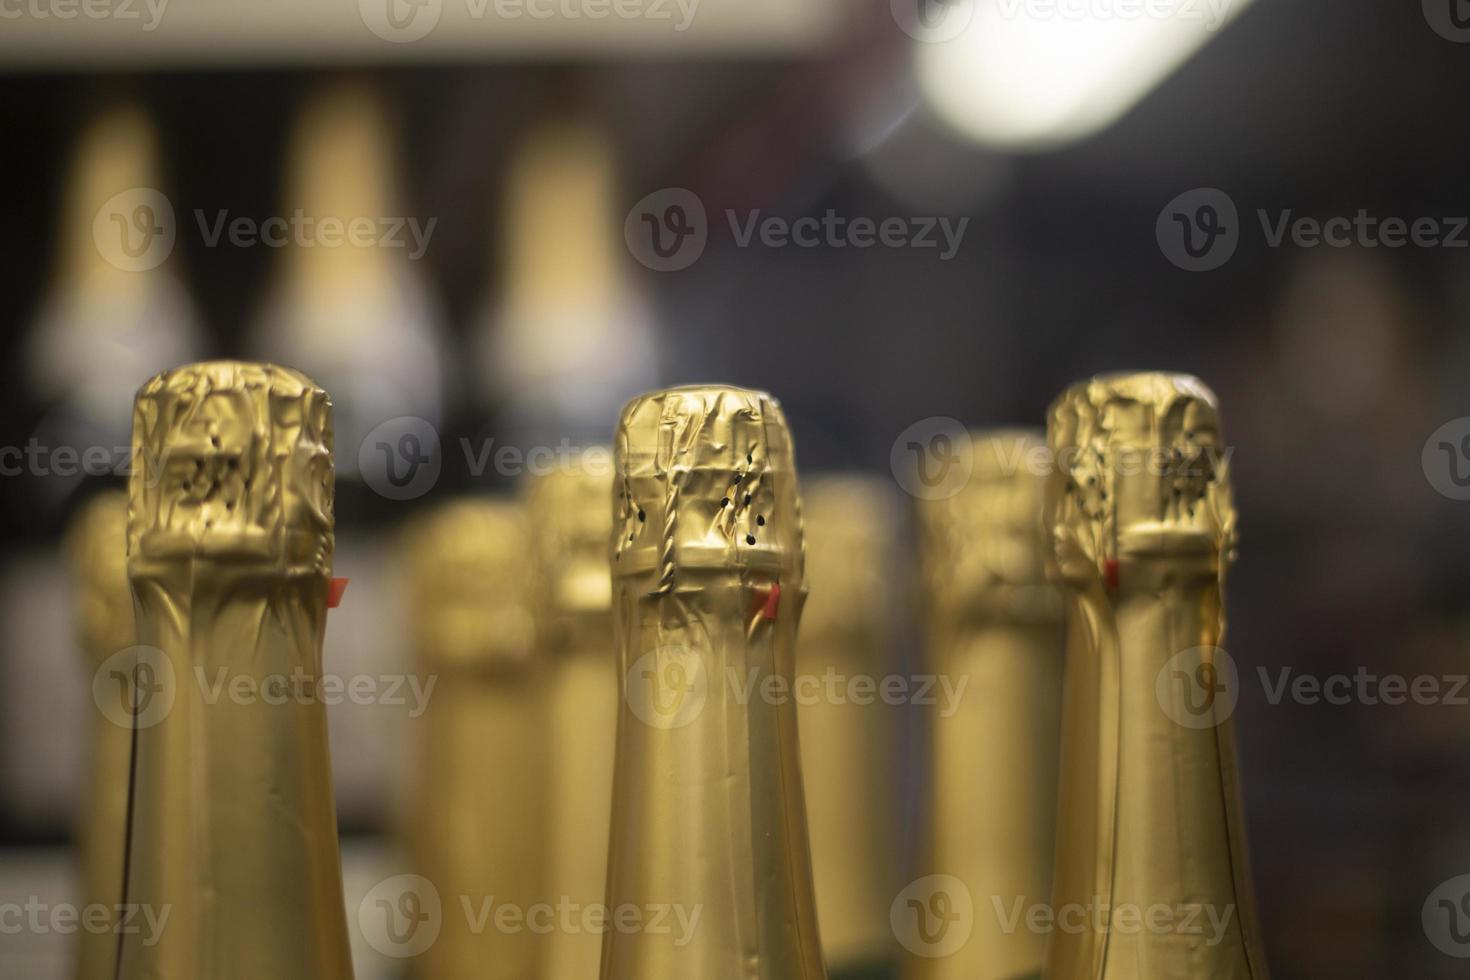 Champagne with gold foil. Bottles of wine in store. Alcoholic beverage stands in row. photo